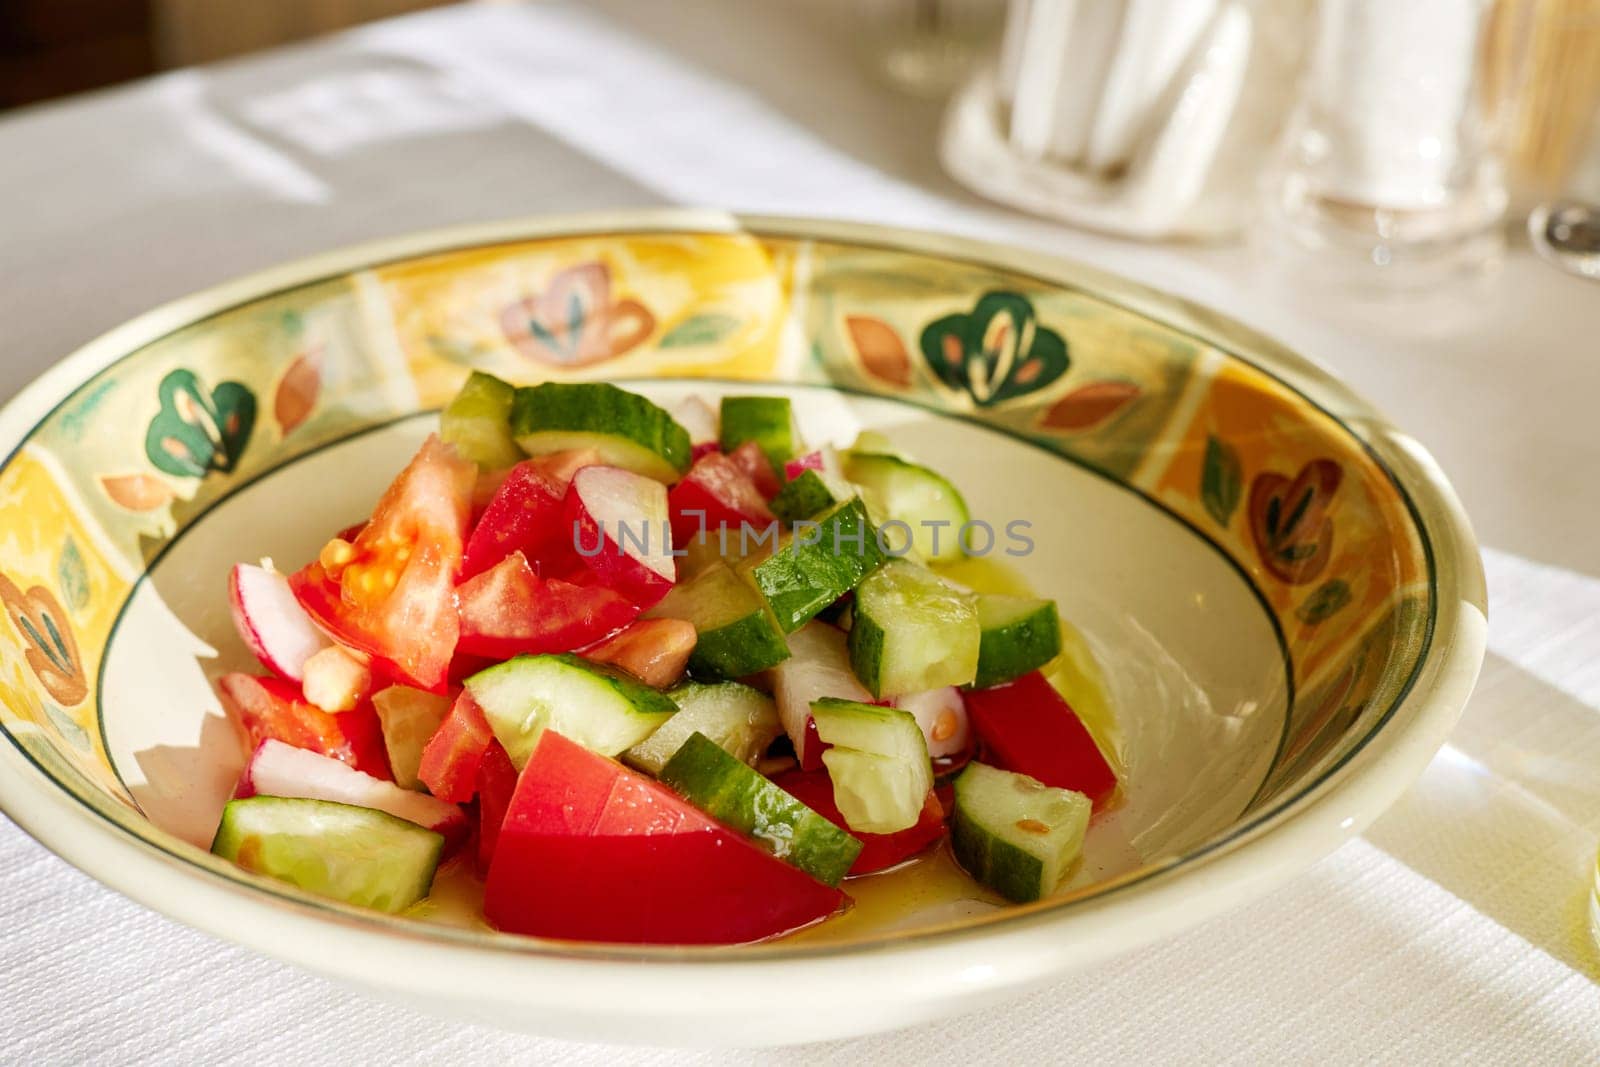 Simple tomato salad with cucumber sunshine by Demkat